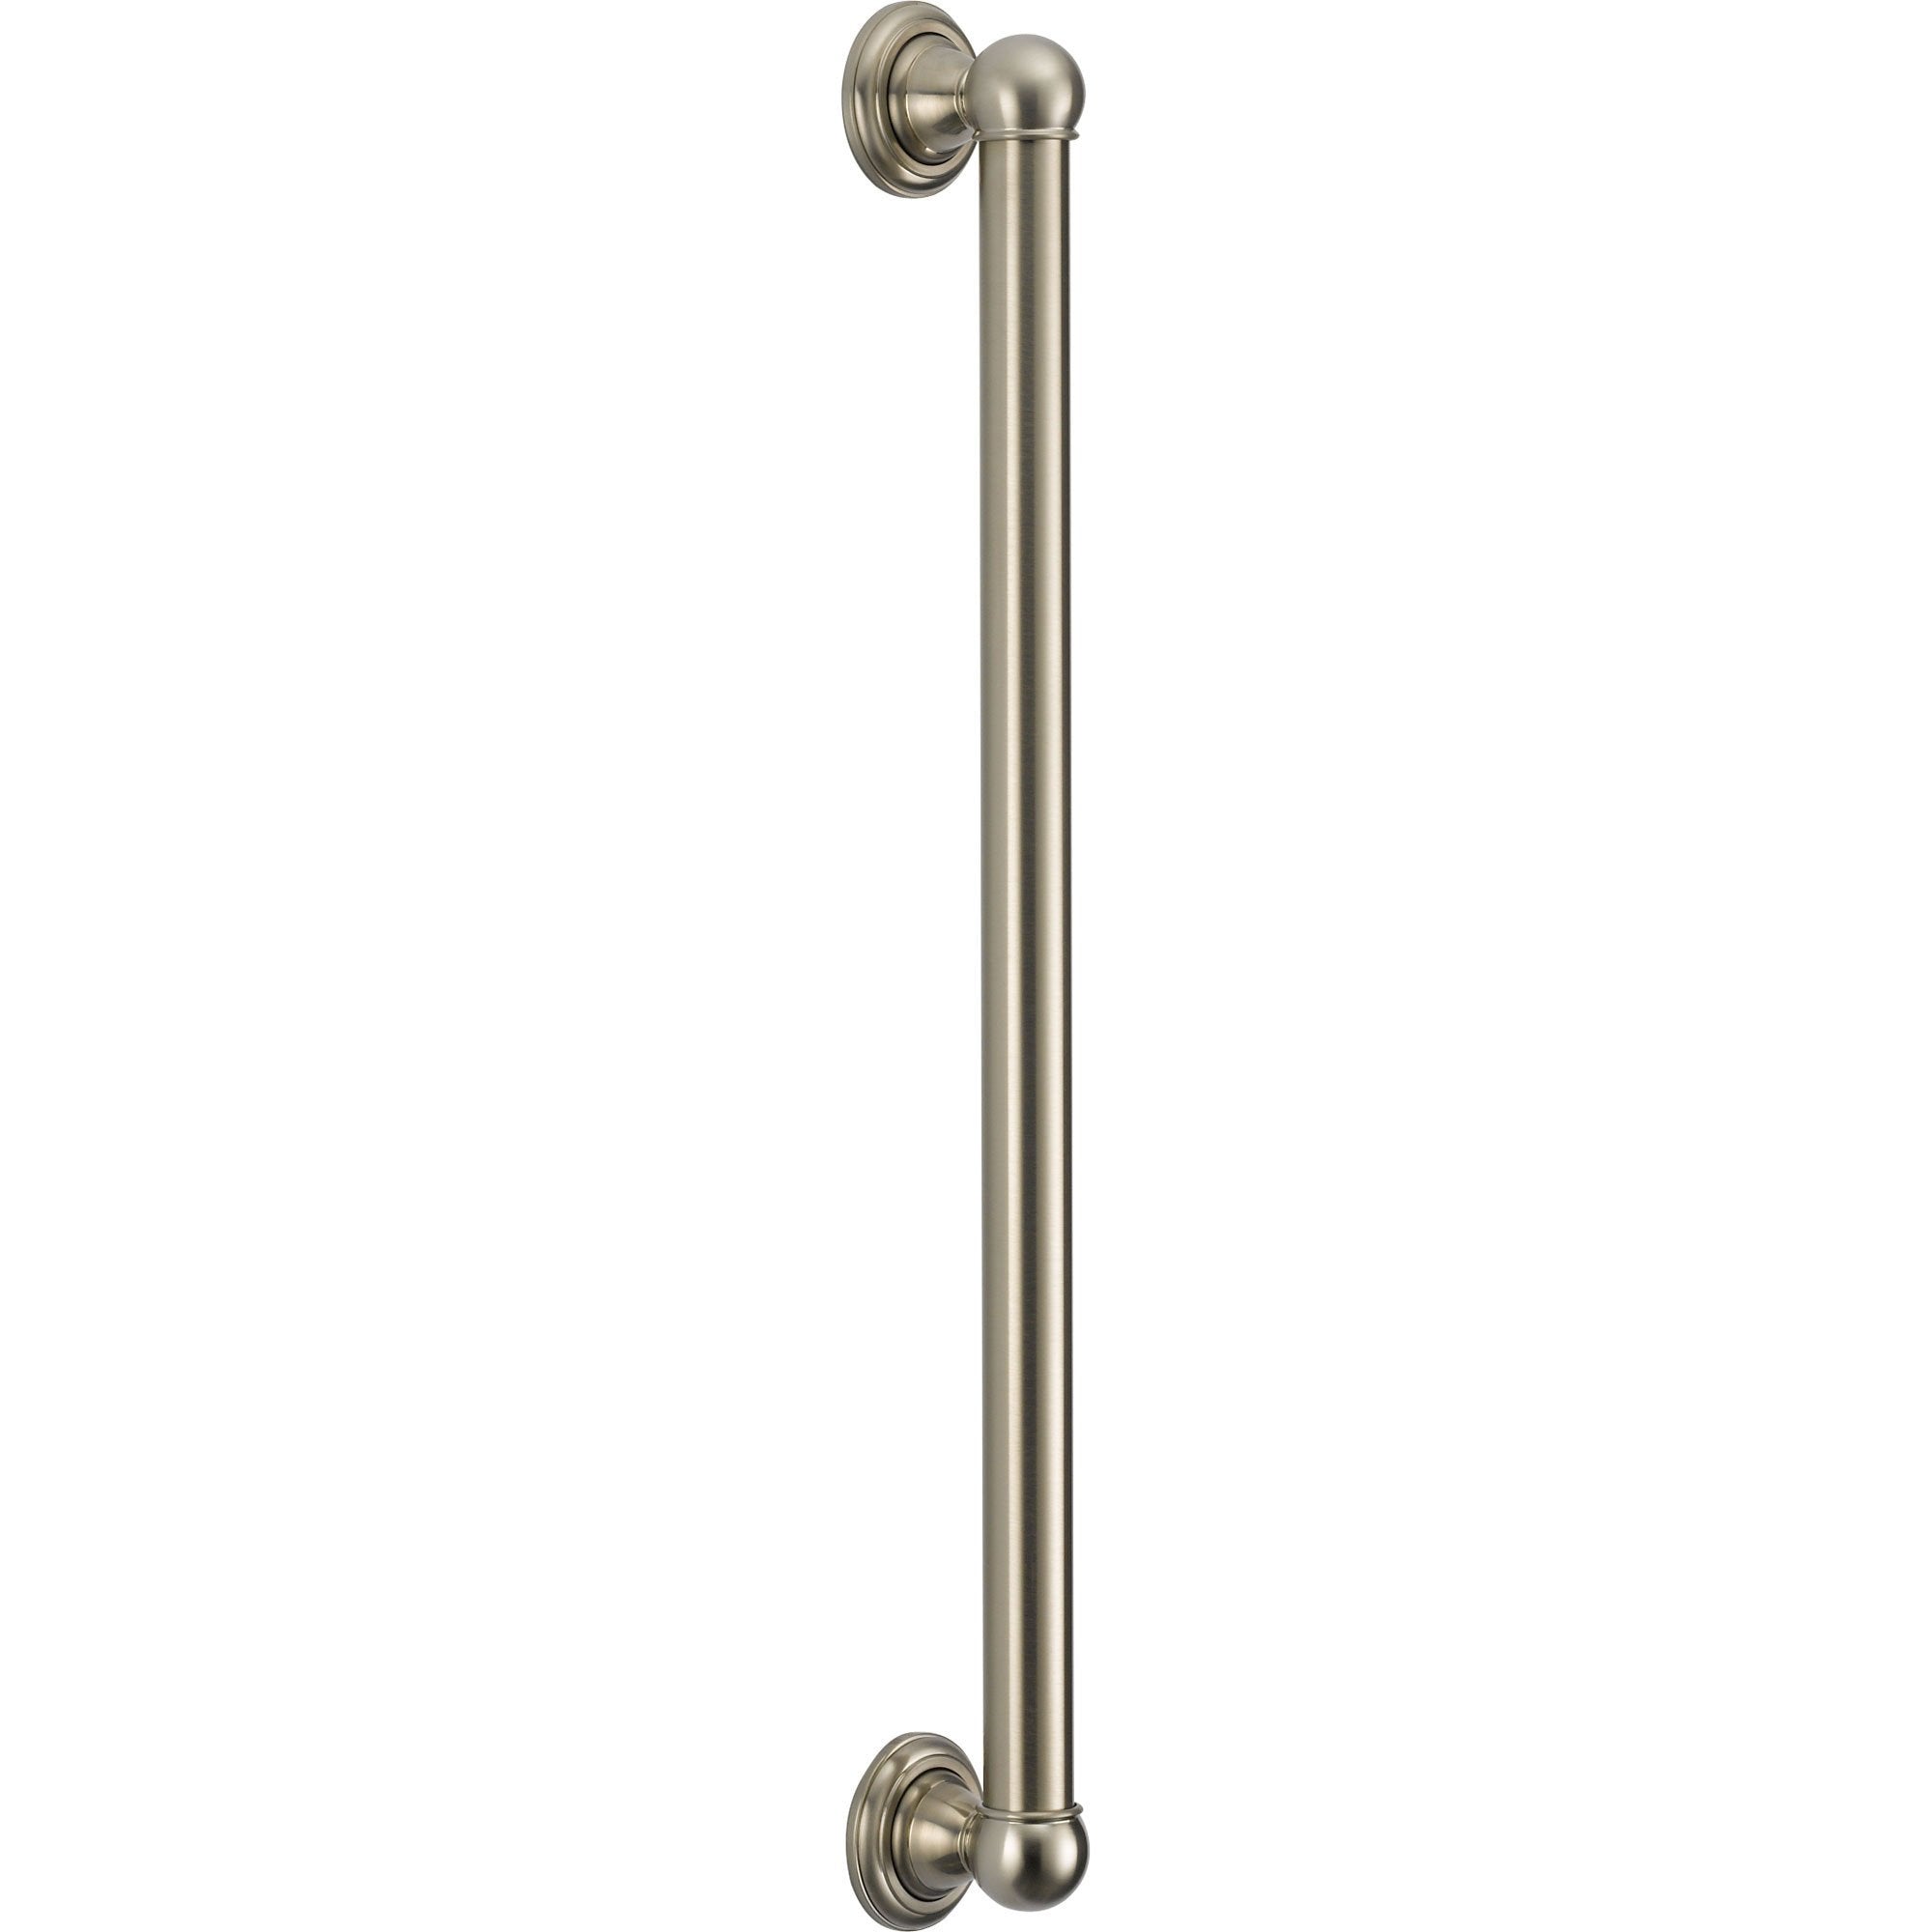 Delta ADA 24 inch Wall Grab Bar in Stainless Steel Finish 561082